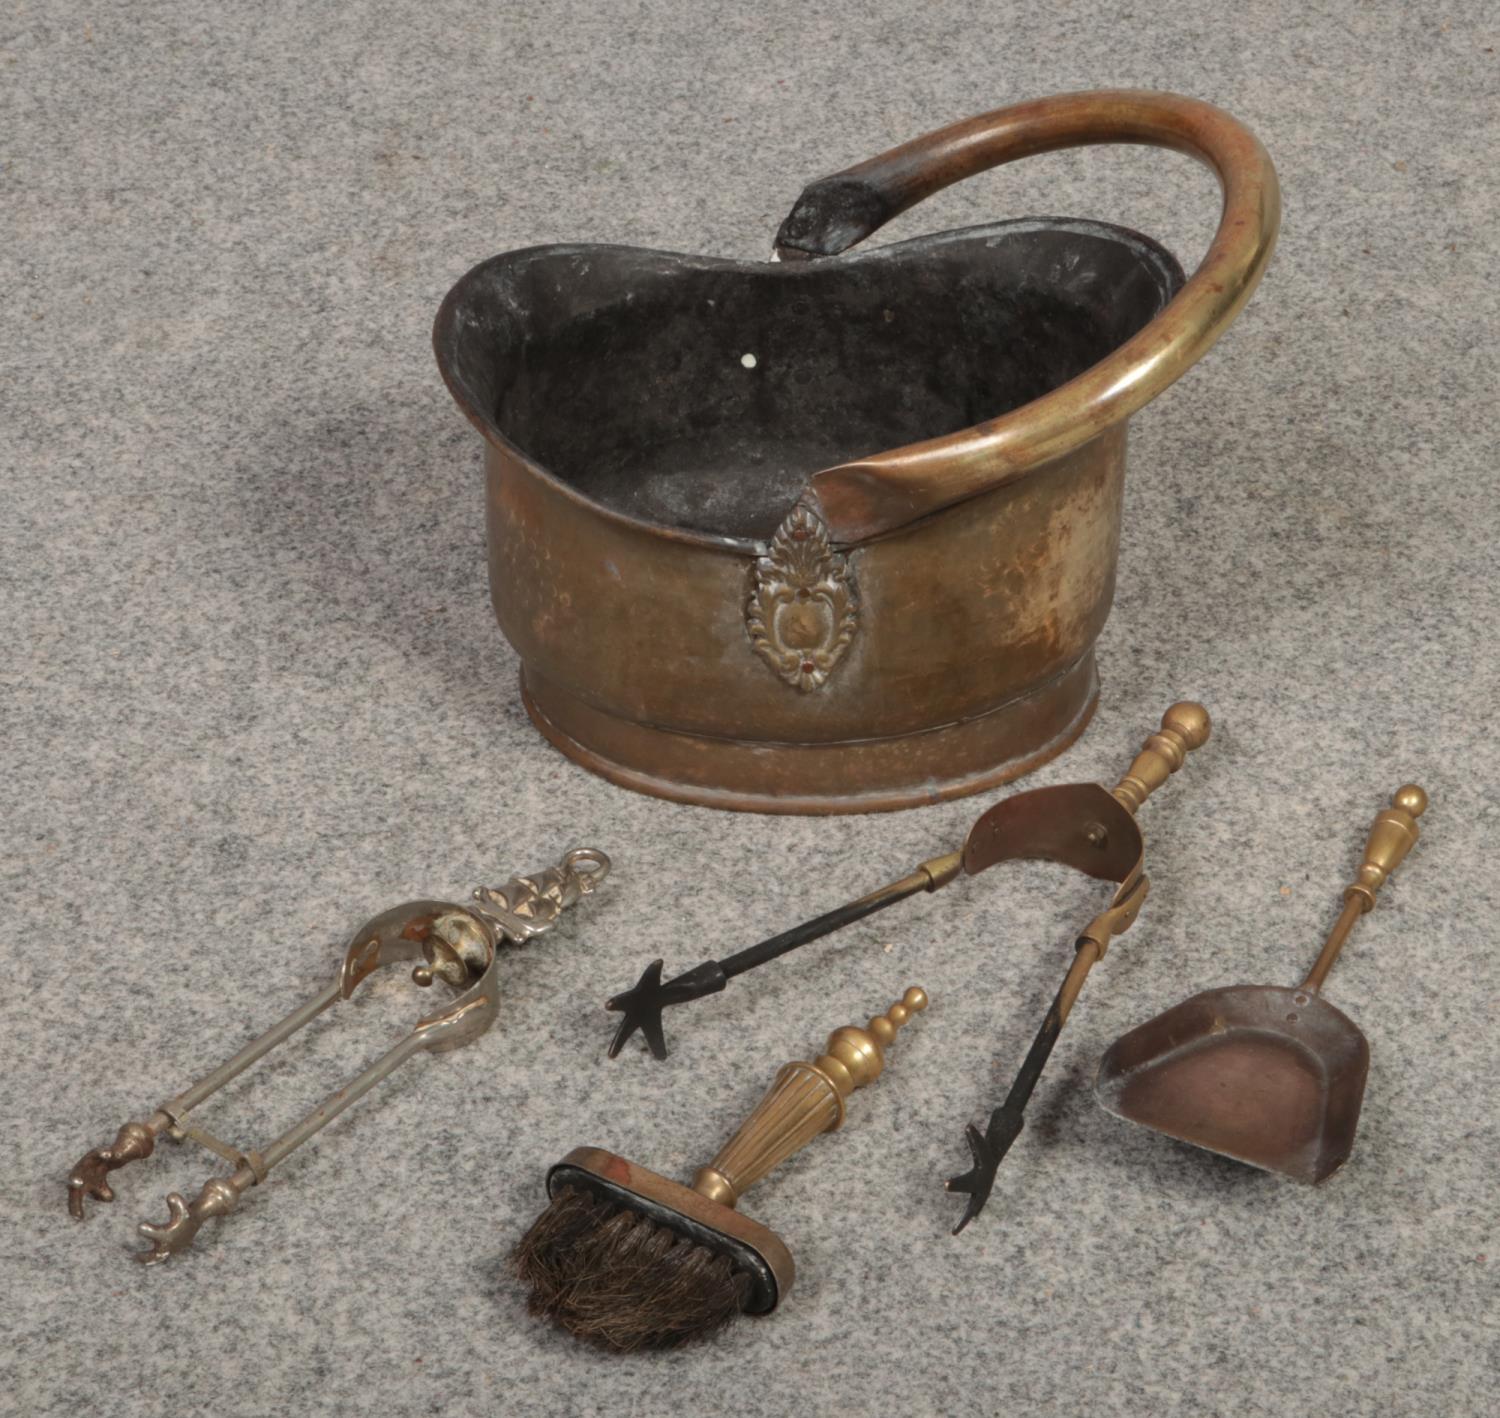 A brass coal helmet / scuttle and collection of fireside tools.